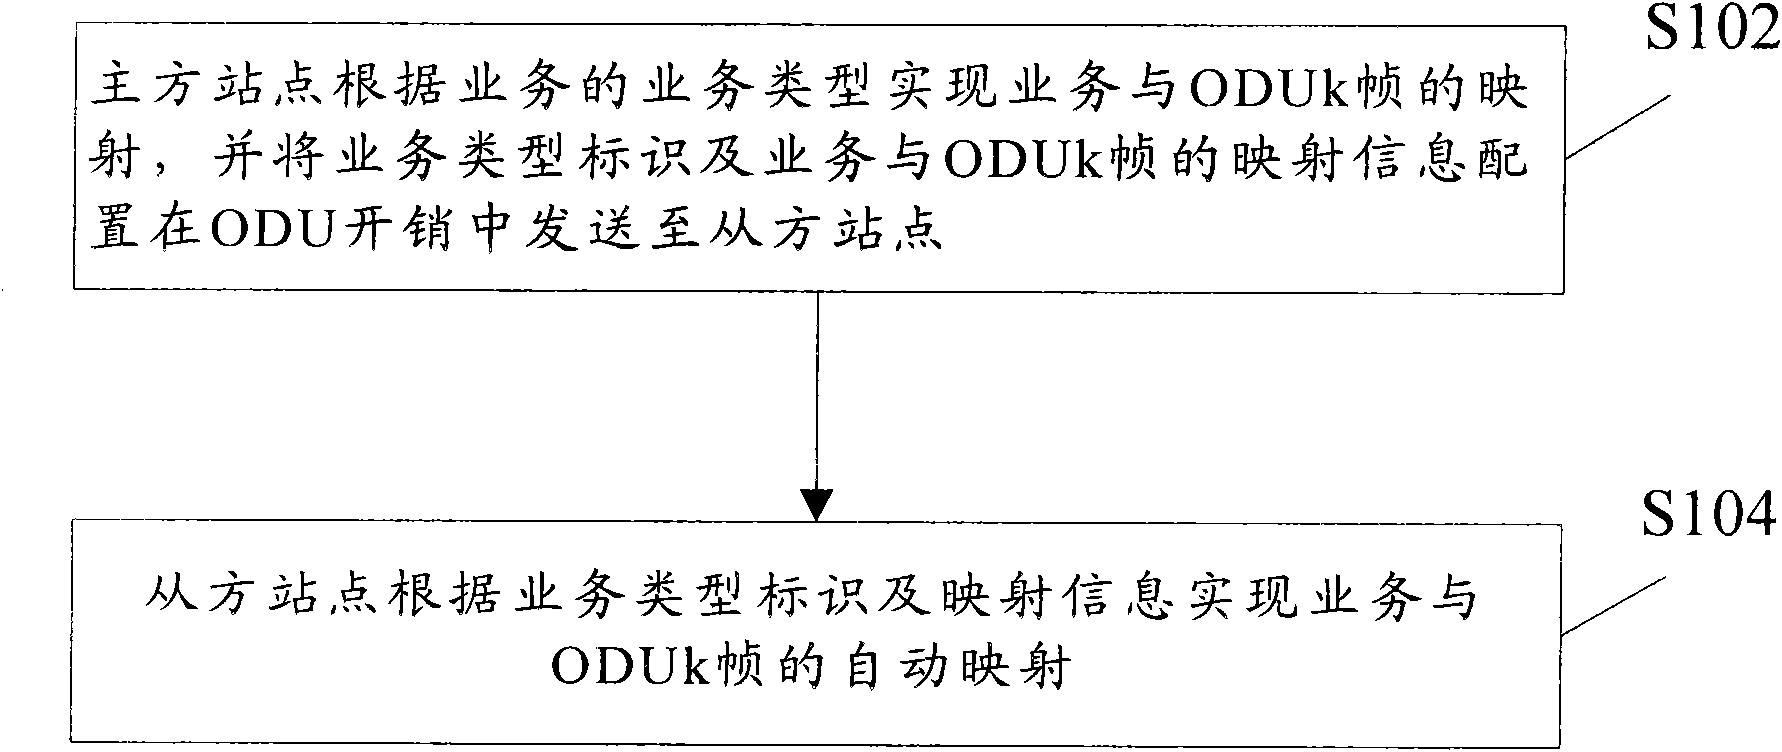 Business-ODUk frame mapping method and system